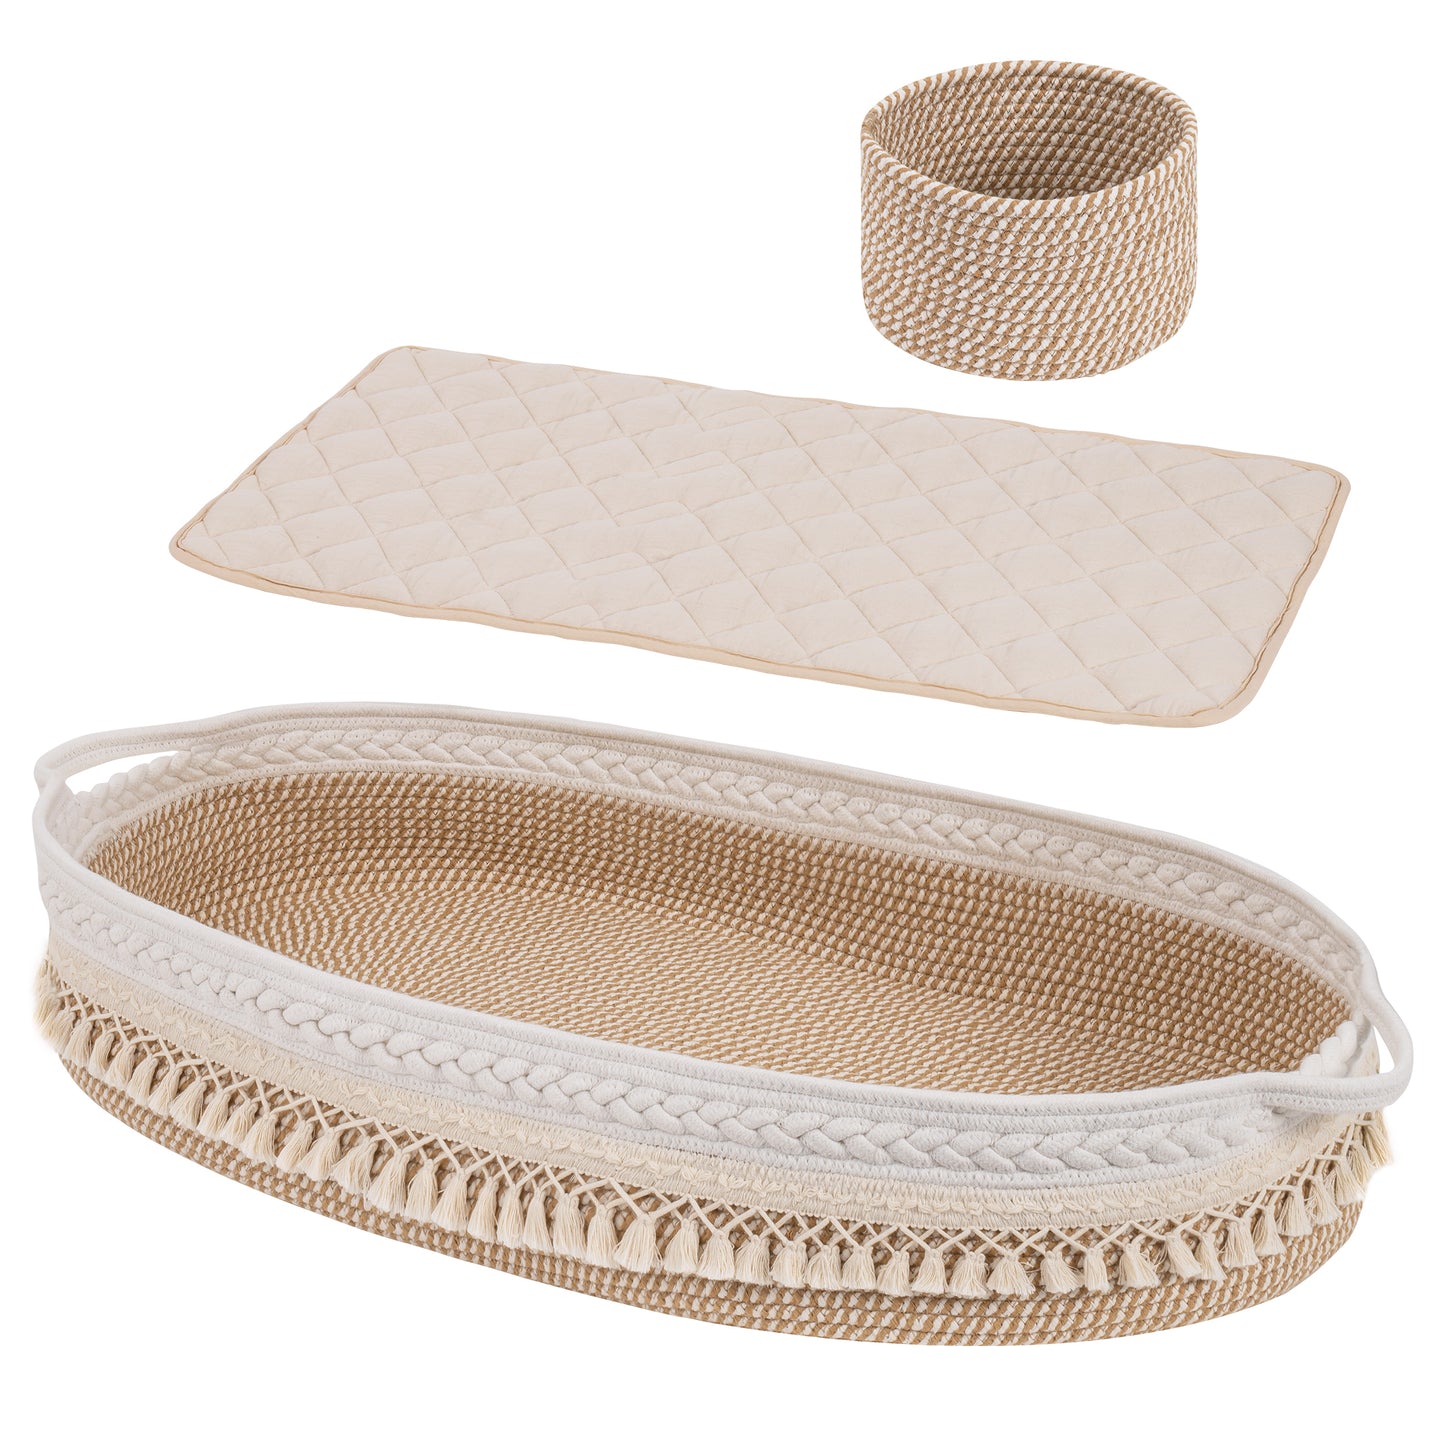 Baby Changing Basket, Handmade Woven Cotton Rope Moses Basket, Changing Table Topper with Mattress Pad (Beige&Brown)